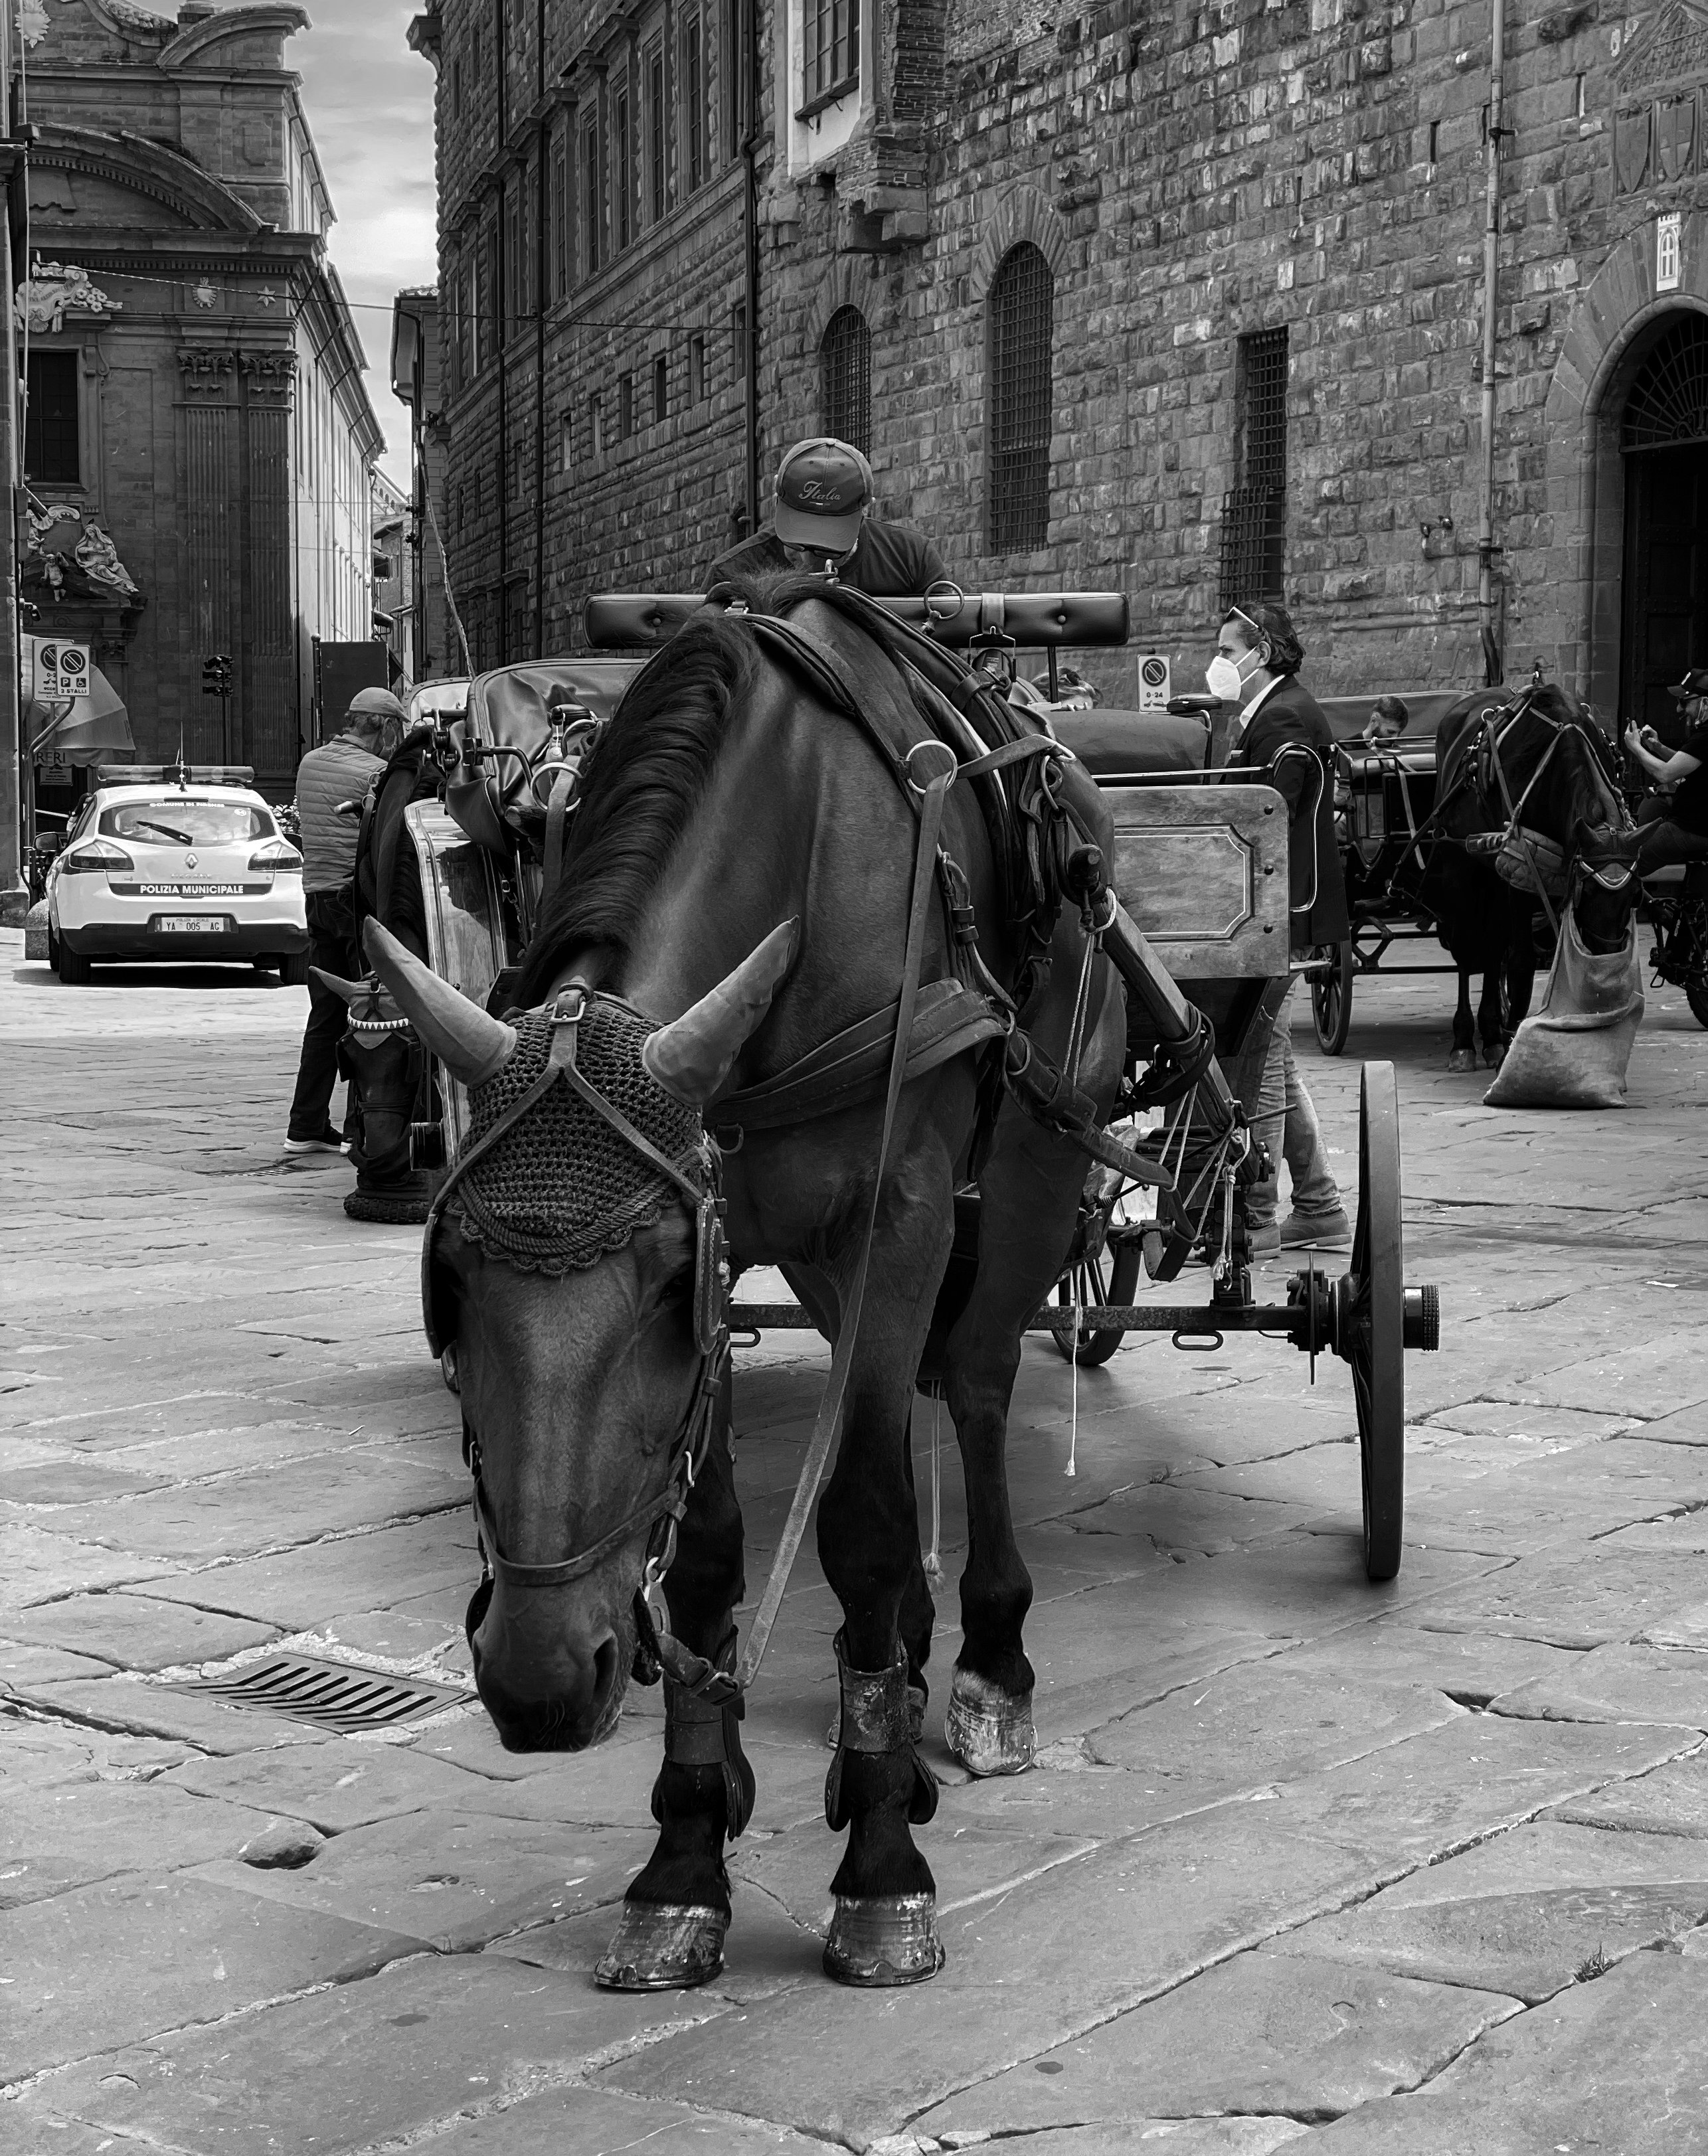 grayscale photo of man riding horse on street